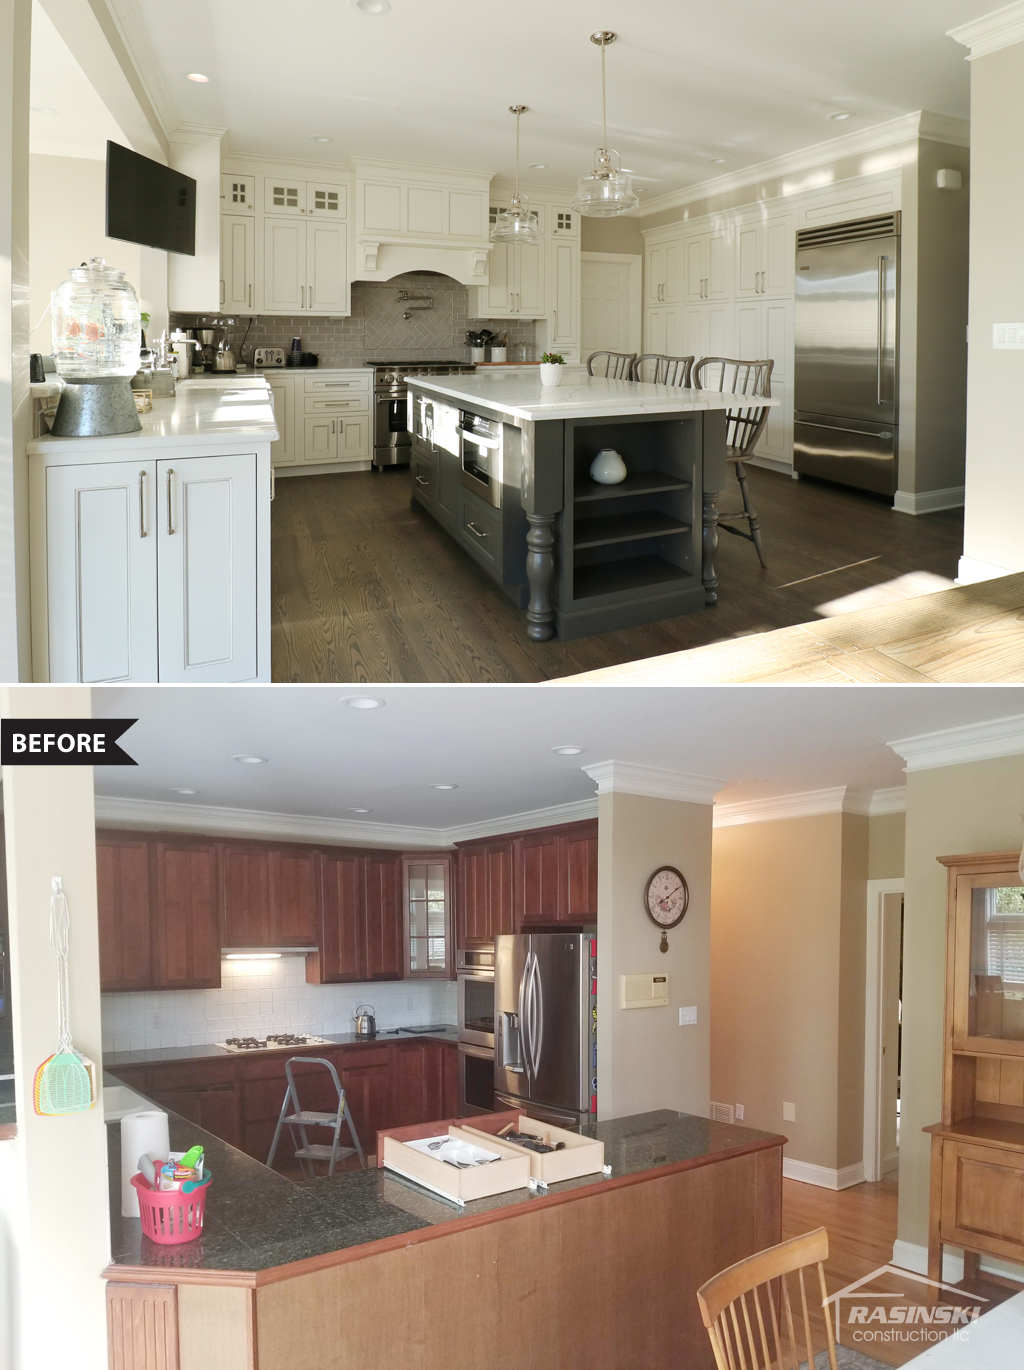 Before and After Photos of Kitchen Remodeling Project in Monmouth County NJ by Rasinski Construction